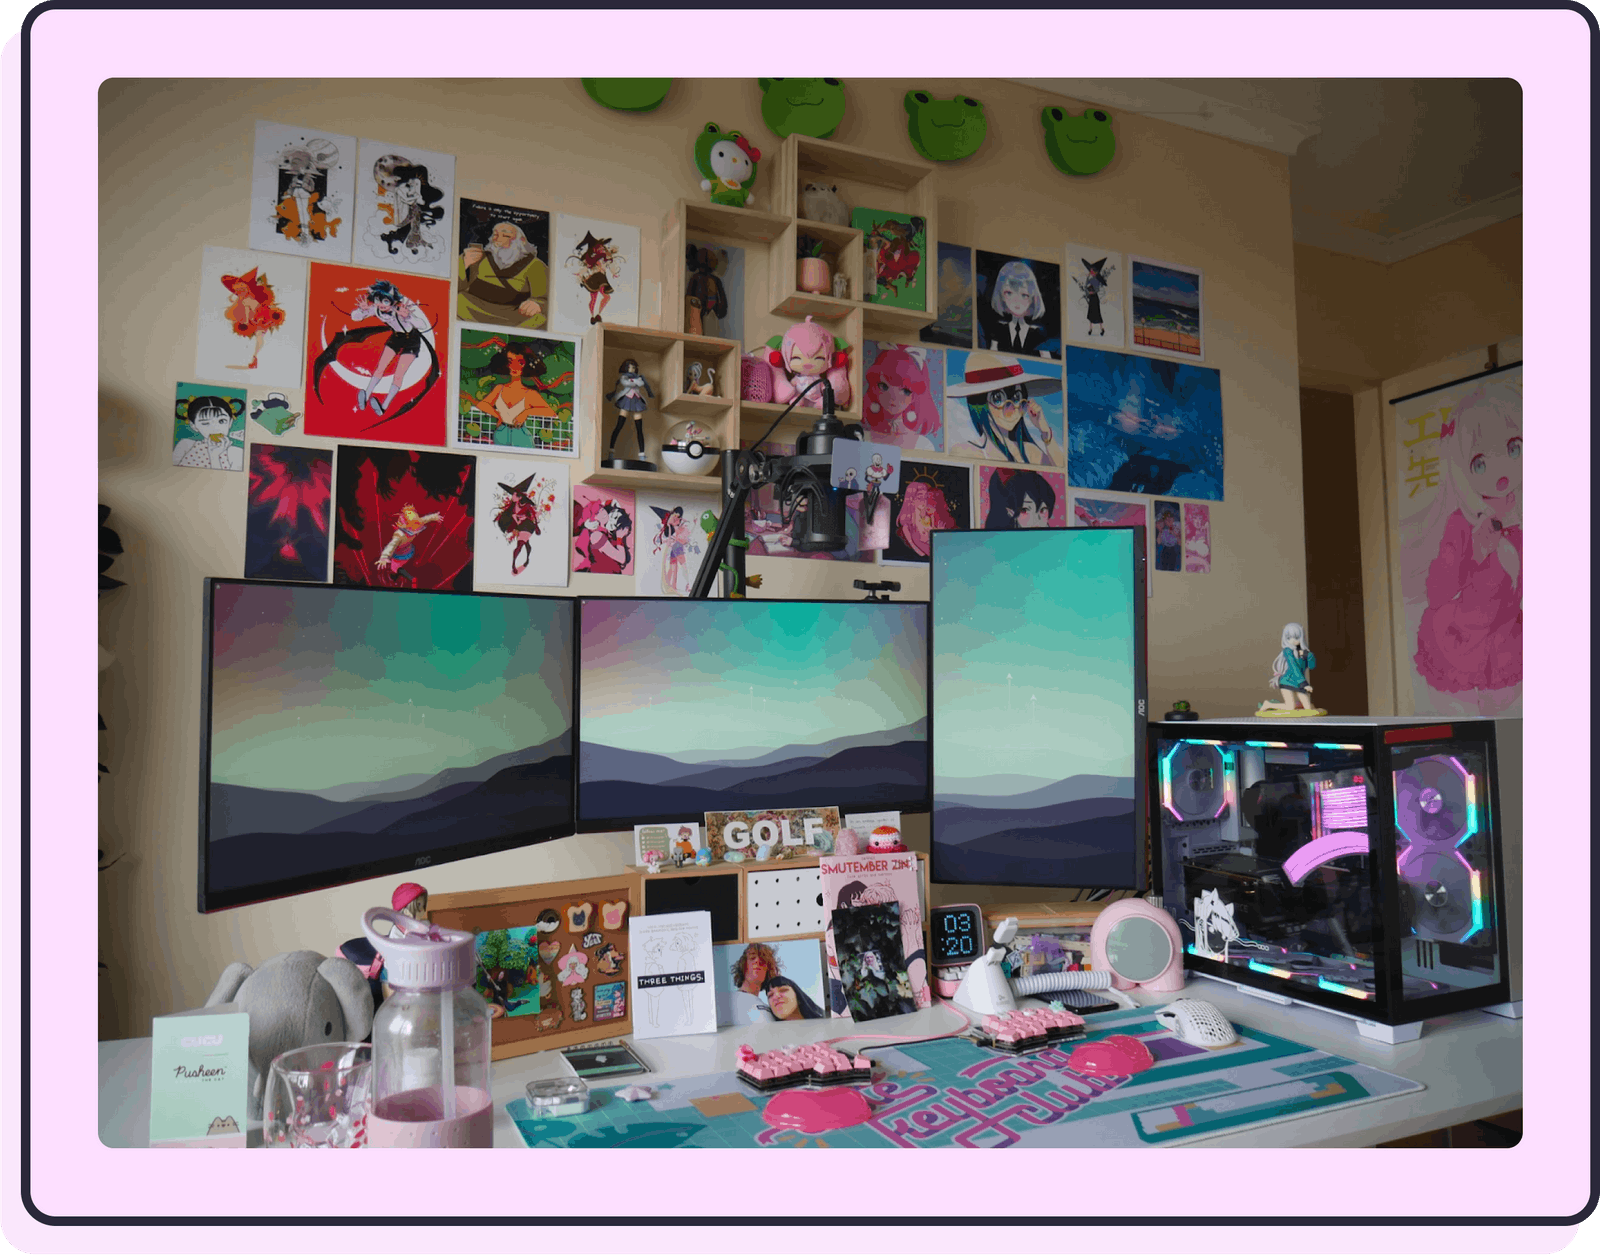 A photo of my desk and computer setup which is absolutely covered with prints, figurines, pins, zines, stickers, and much more.